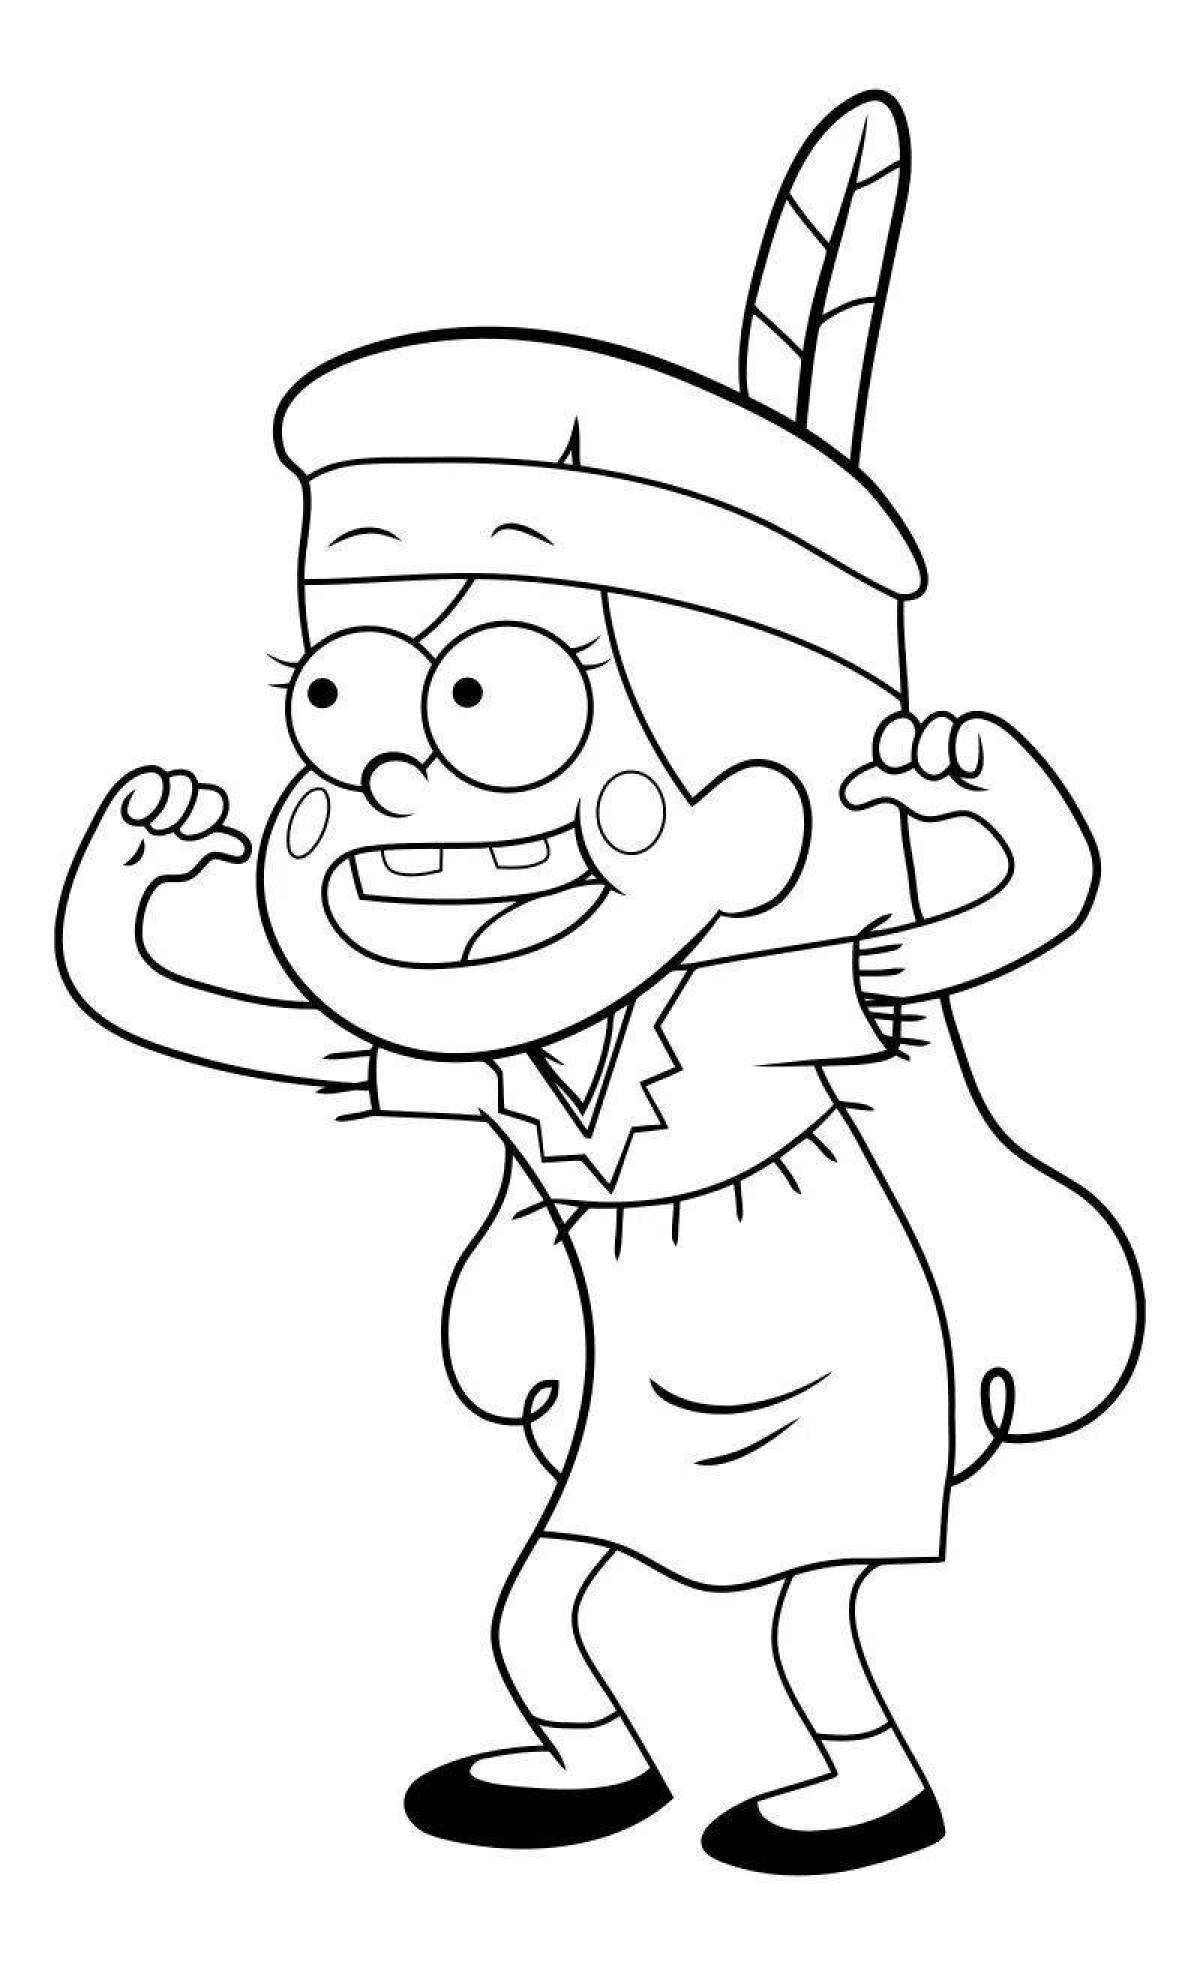 Mabel's funny coloring book